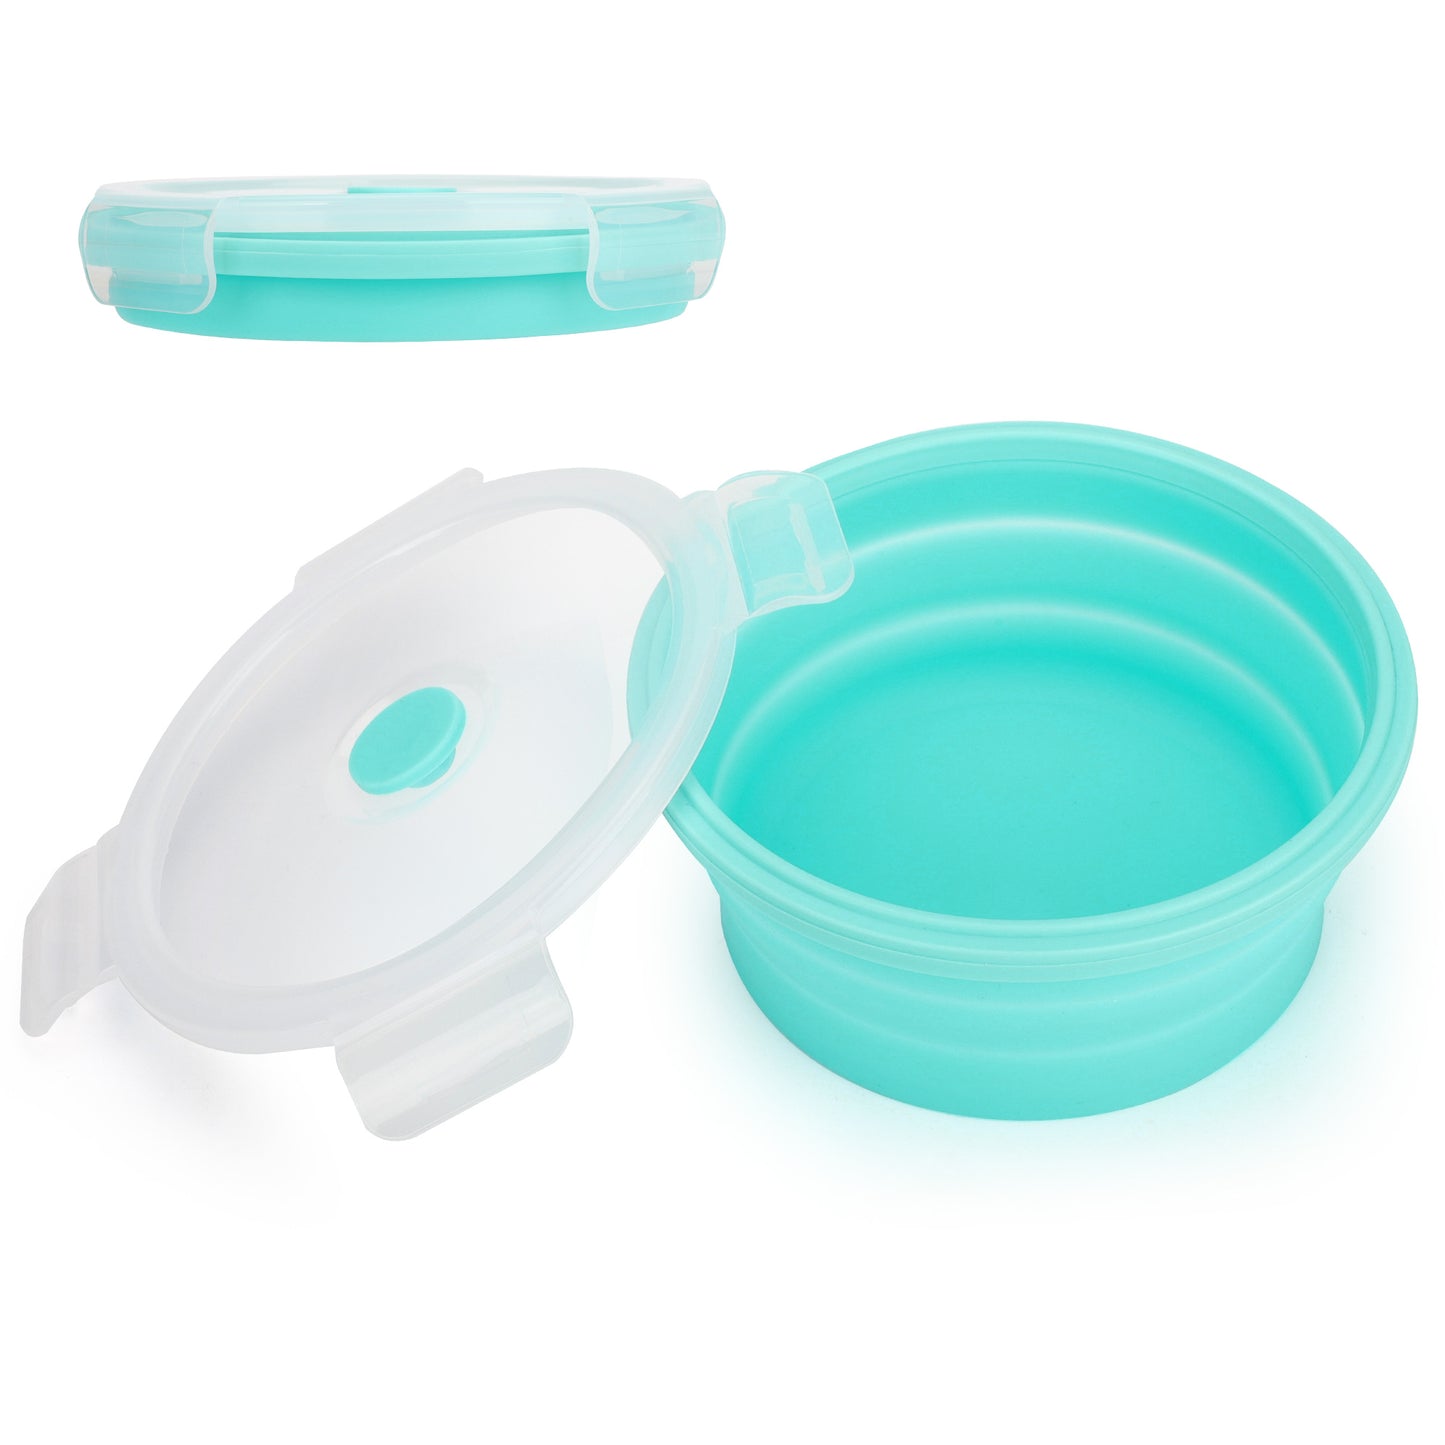 Collapsible Pet Bowl with Lid - Portable Silicone Feeding Dishes for Dogs and Cats indoor and outdoor use ,idea for camping, hiking( Light Blue)